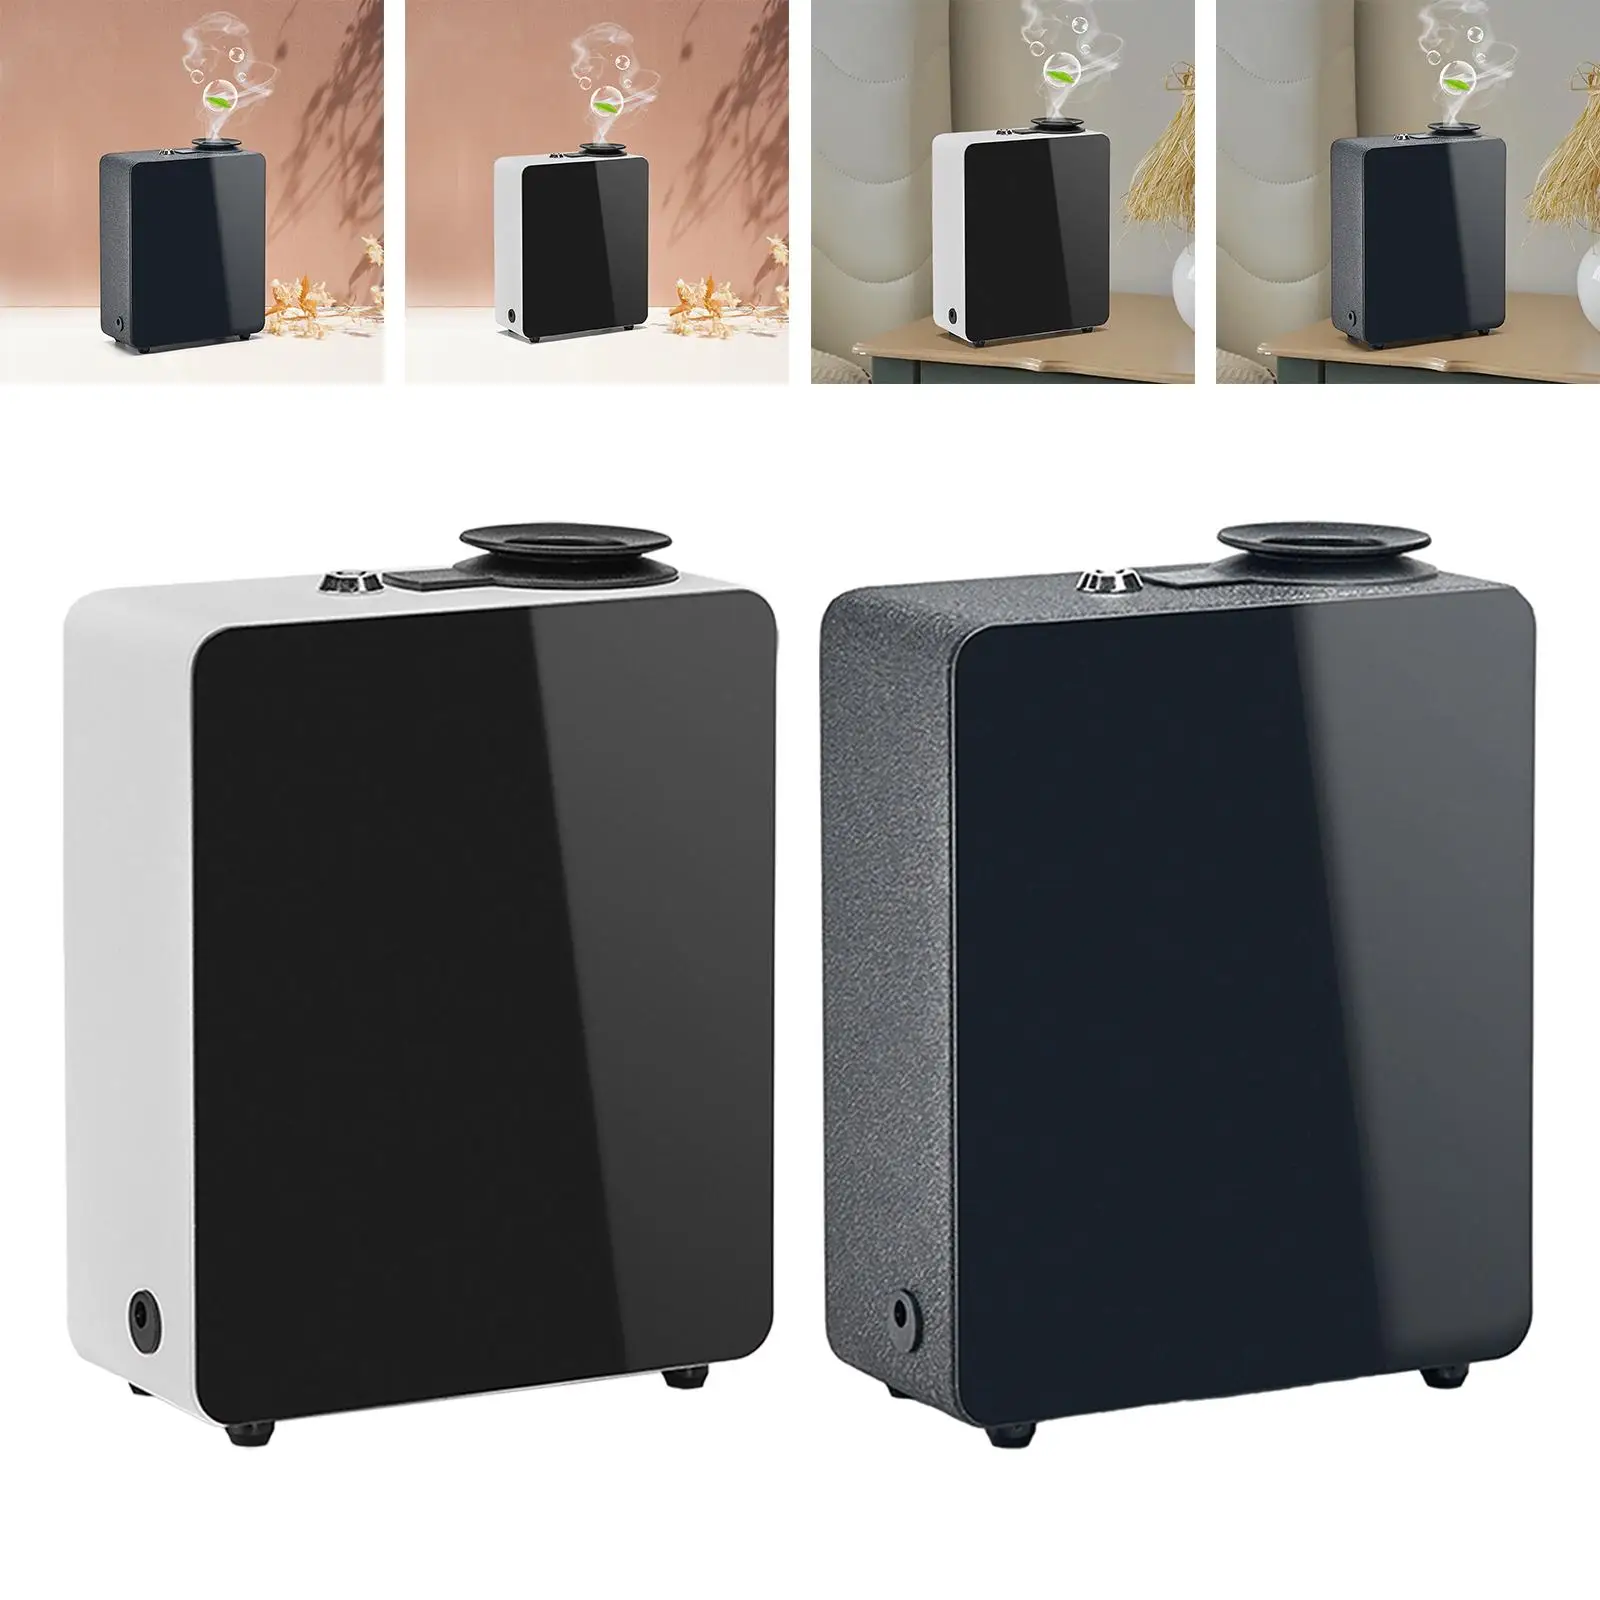 Essential Oil Diffuser Aroma Diffuser Portable for Nursery Hotel Bedroom